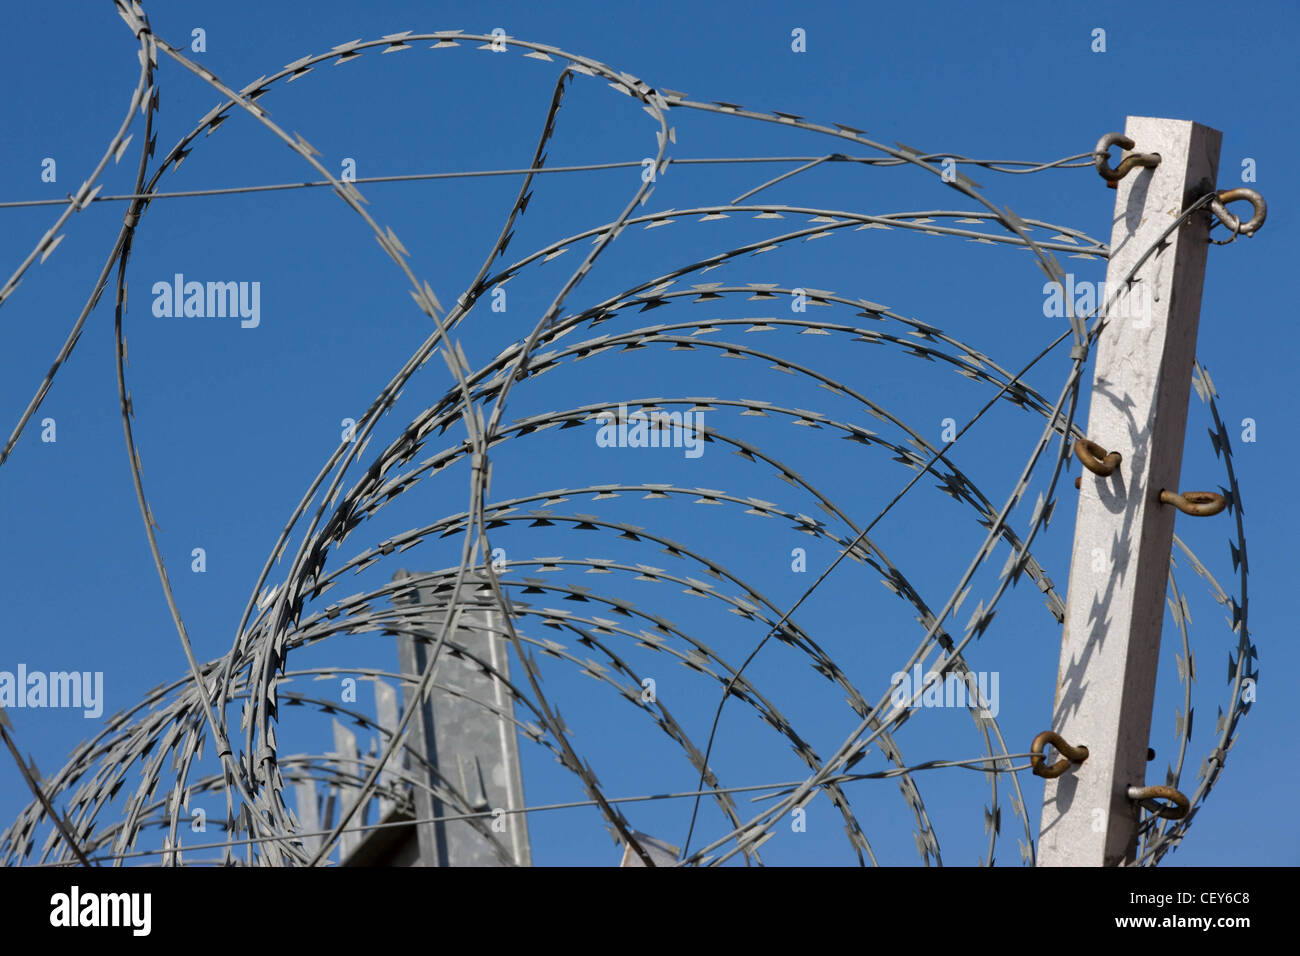 Security fencing Stock Photo